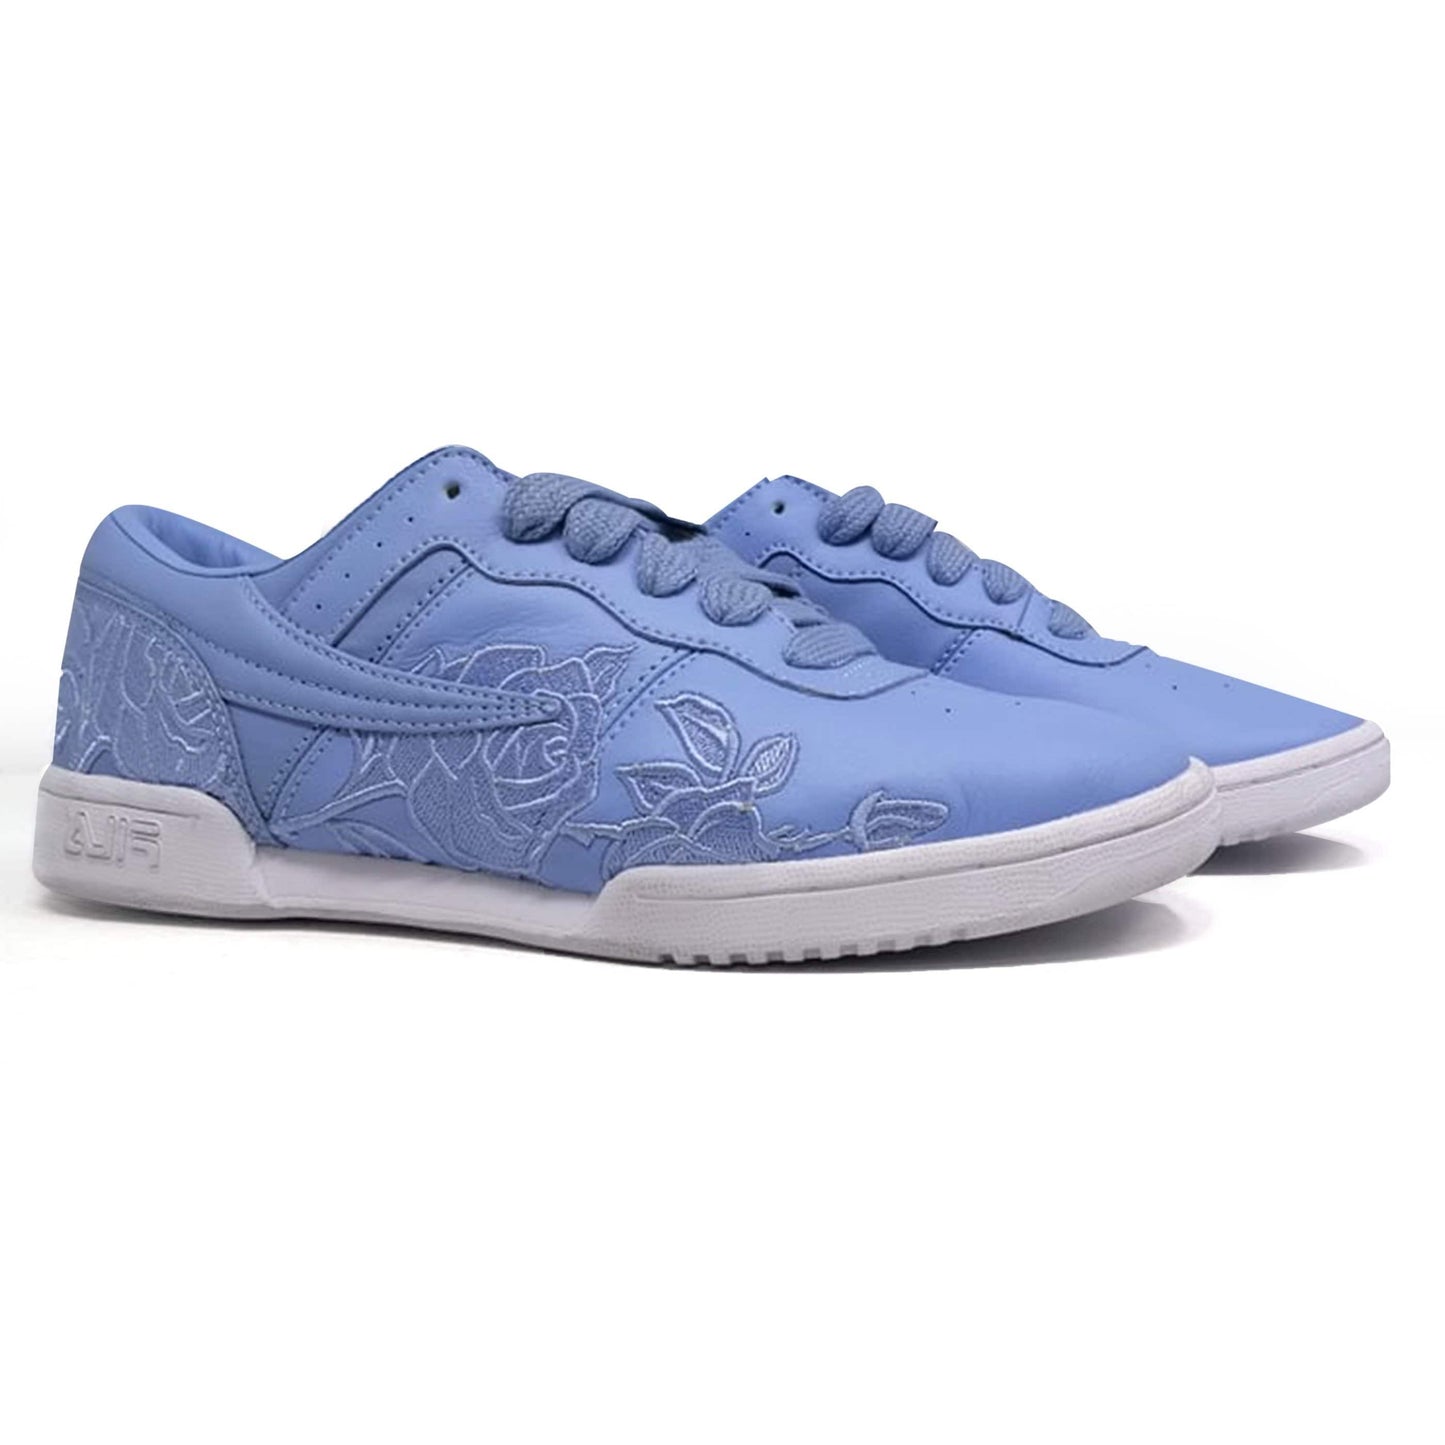 FILA Athletic Shoes 37 Original Fitness Embroidery